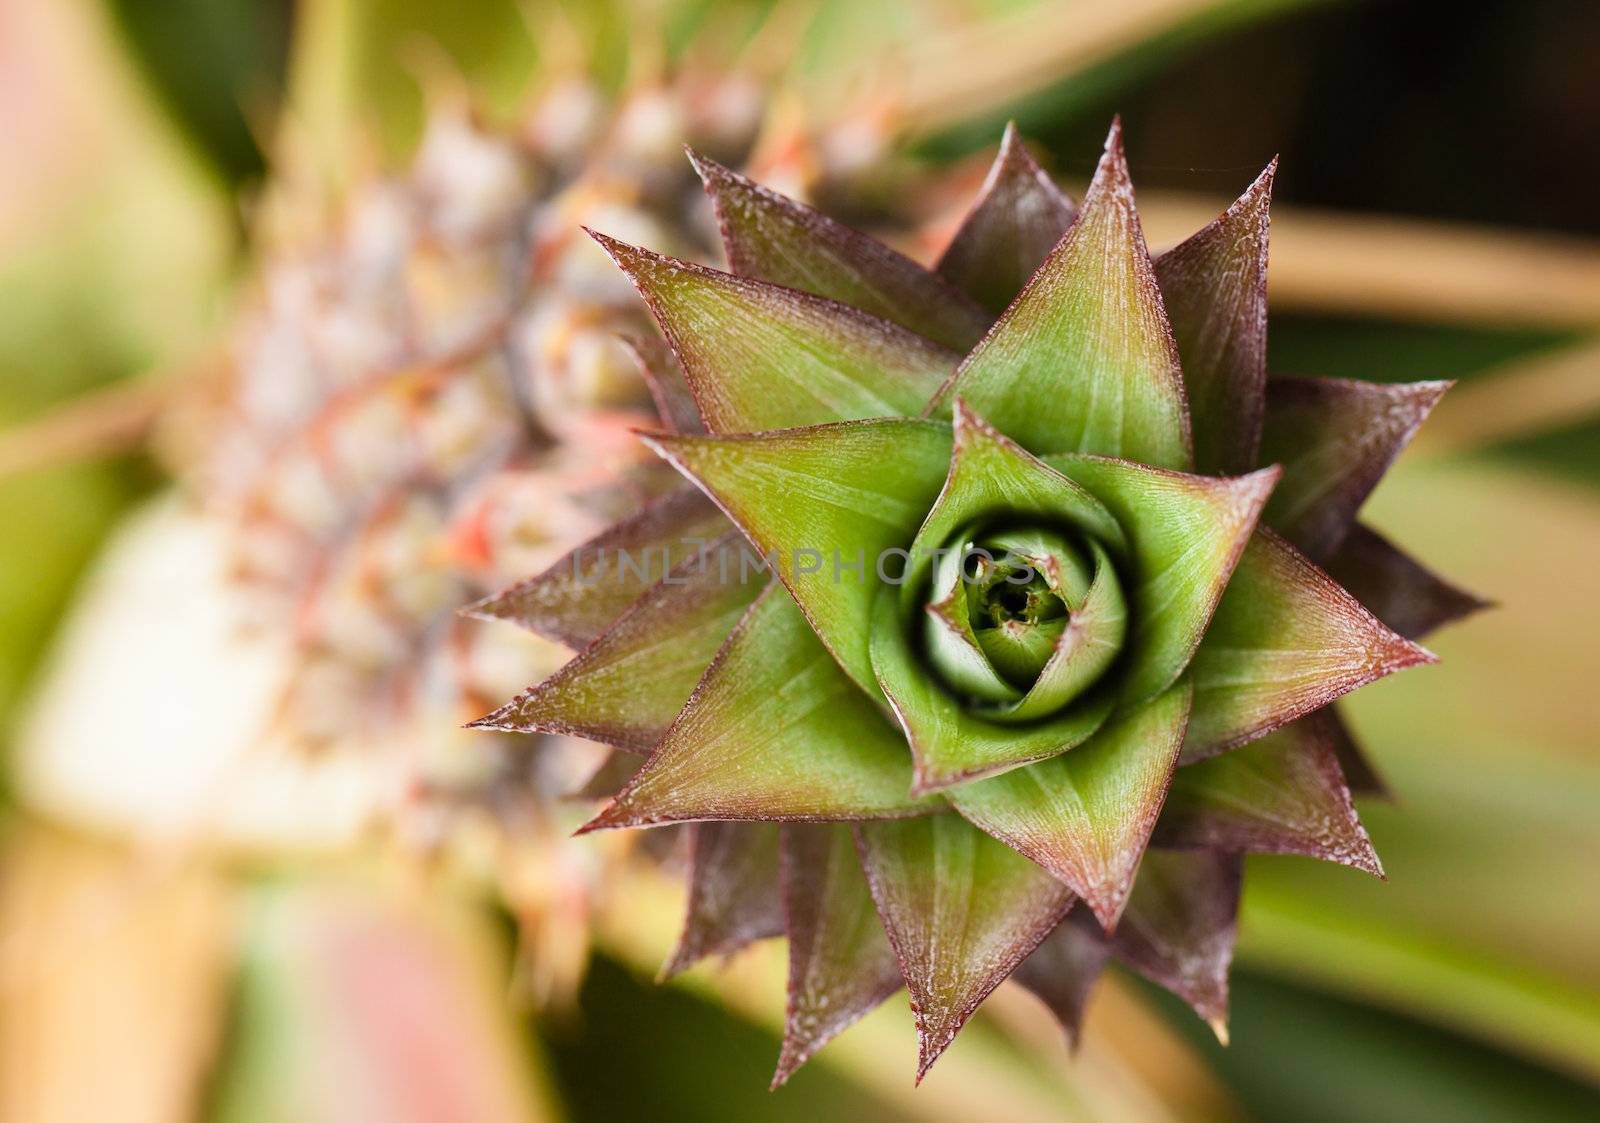 A close-up shot of pineapple growing on a plant. Taken from above.